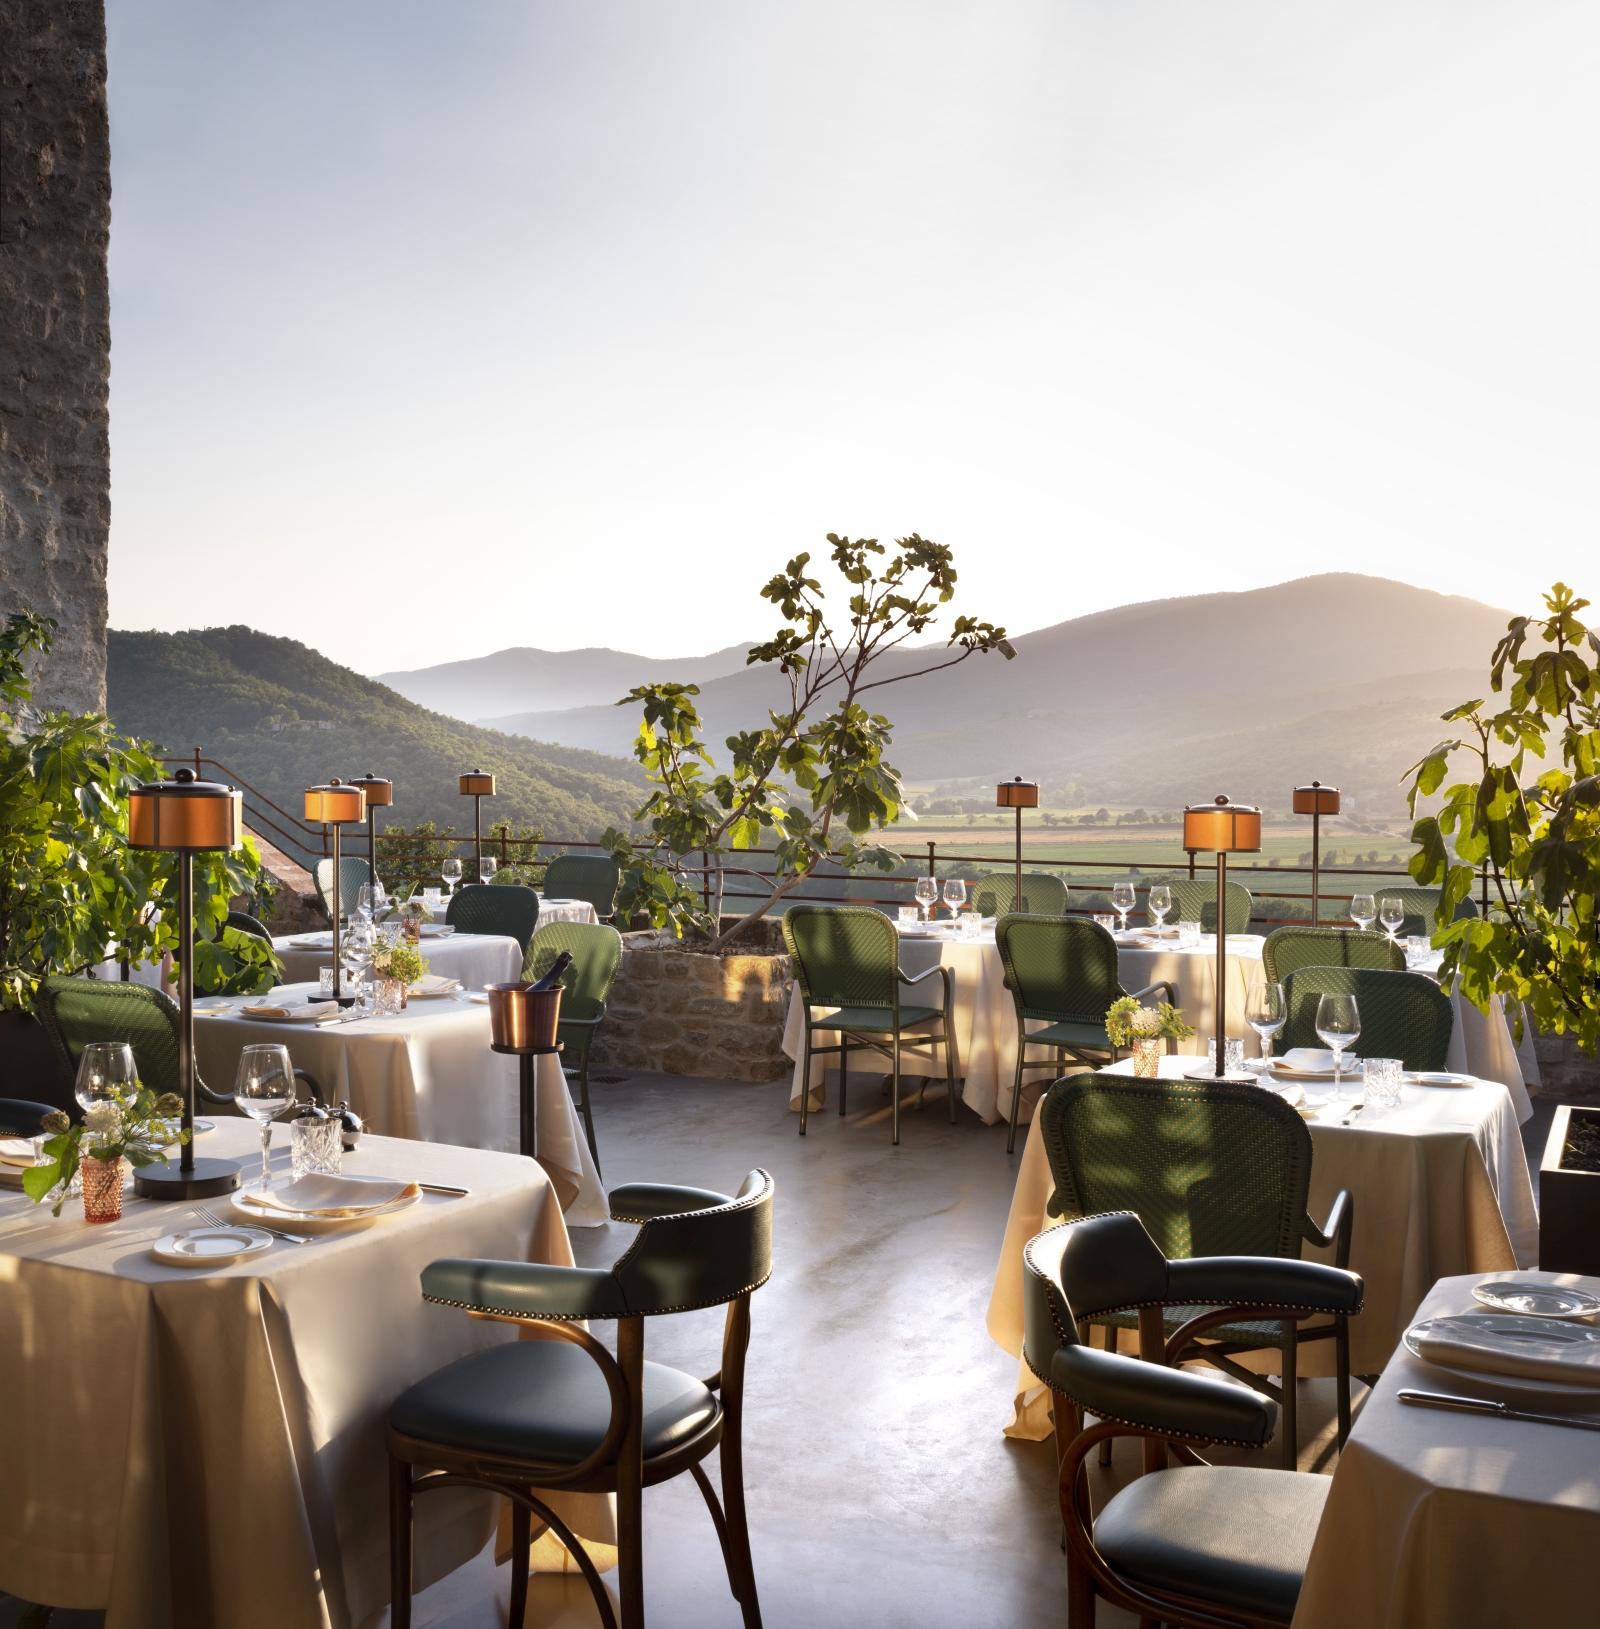 Terrace dining at luxury hotel Castello di Reschio in Italy, with views over the sweeping hills of Umbria